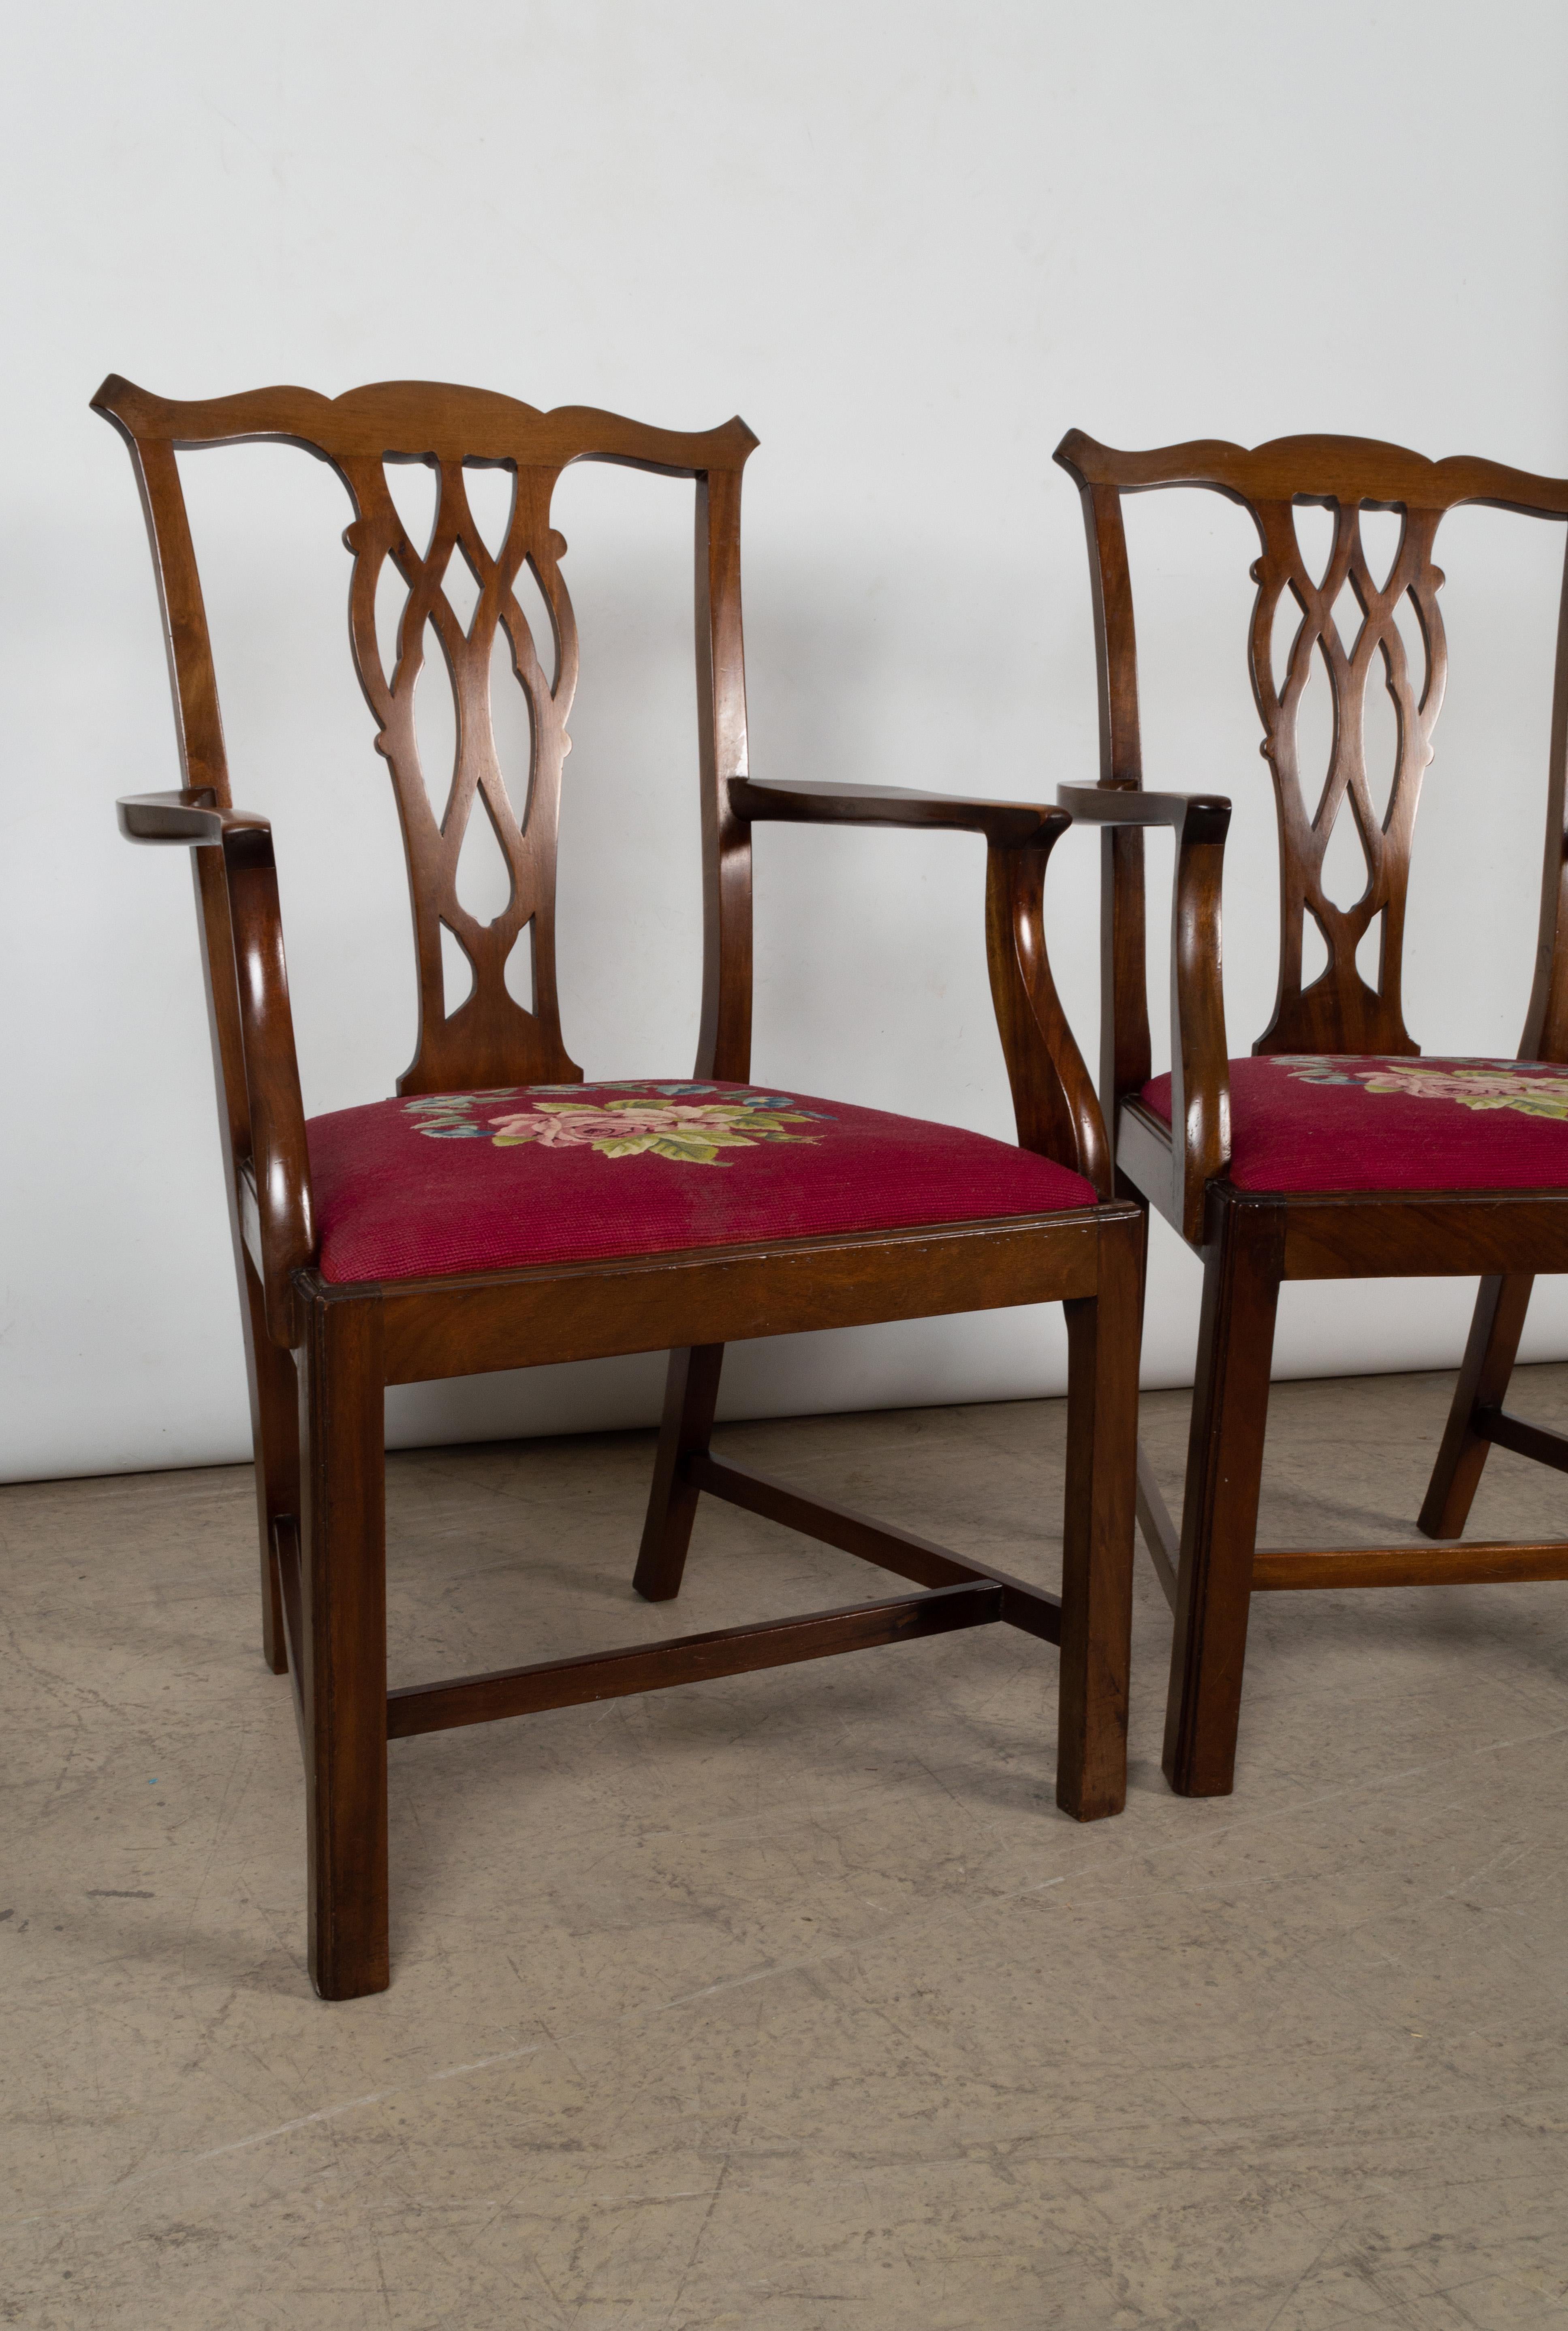 6 Antique English Victorian Chippendale Revival Mahogany Dining Chairs In Good Condition For Sale In London, GB